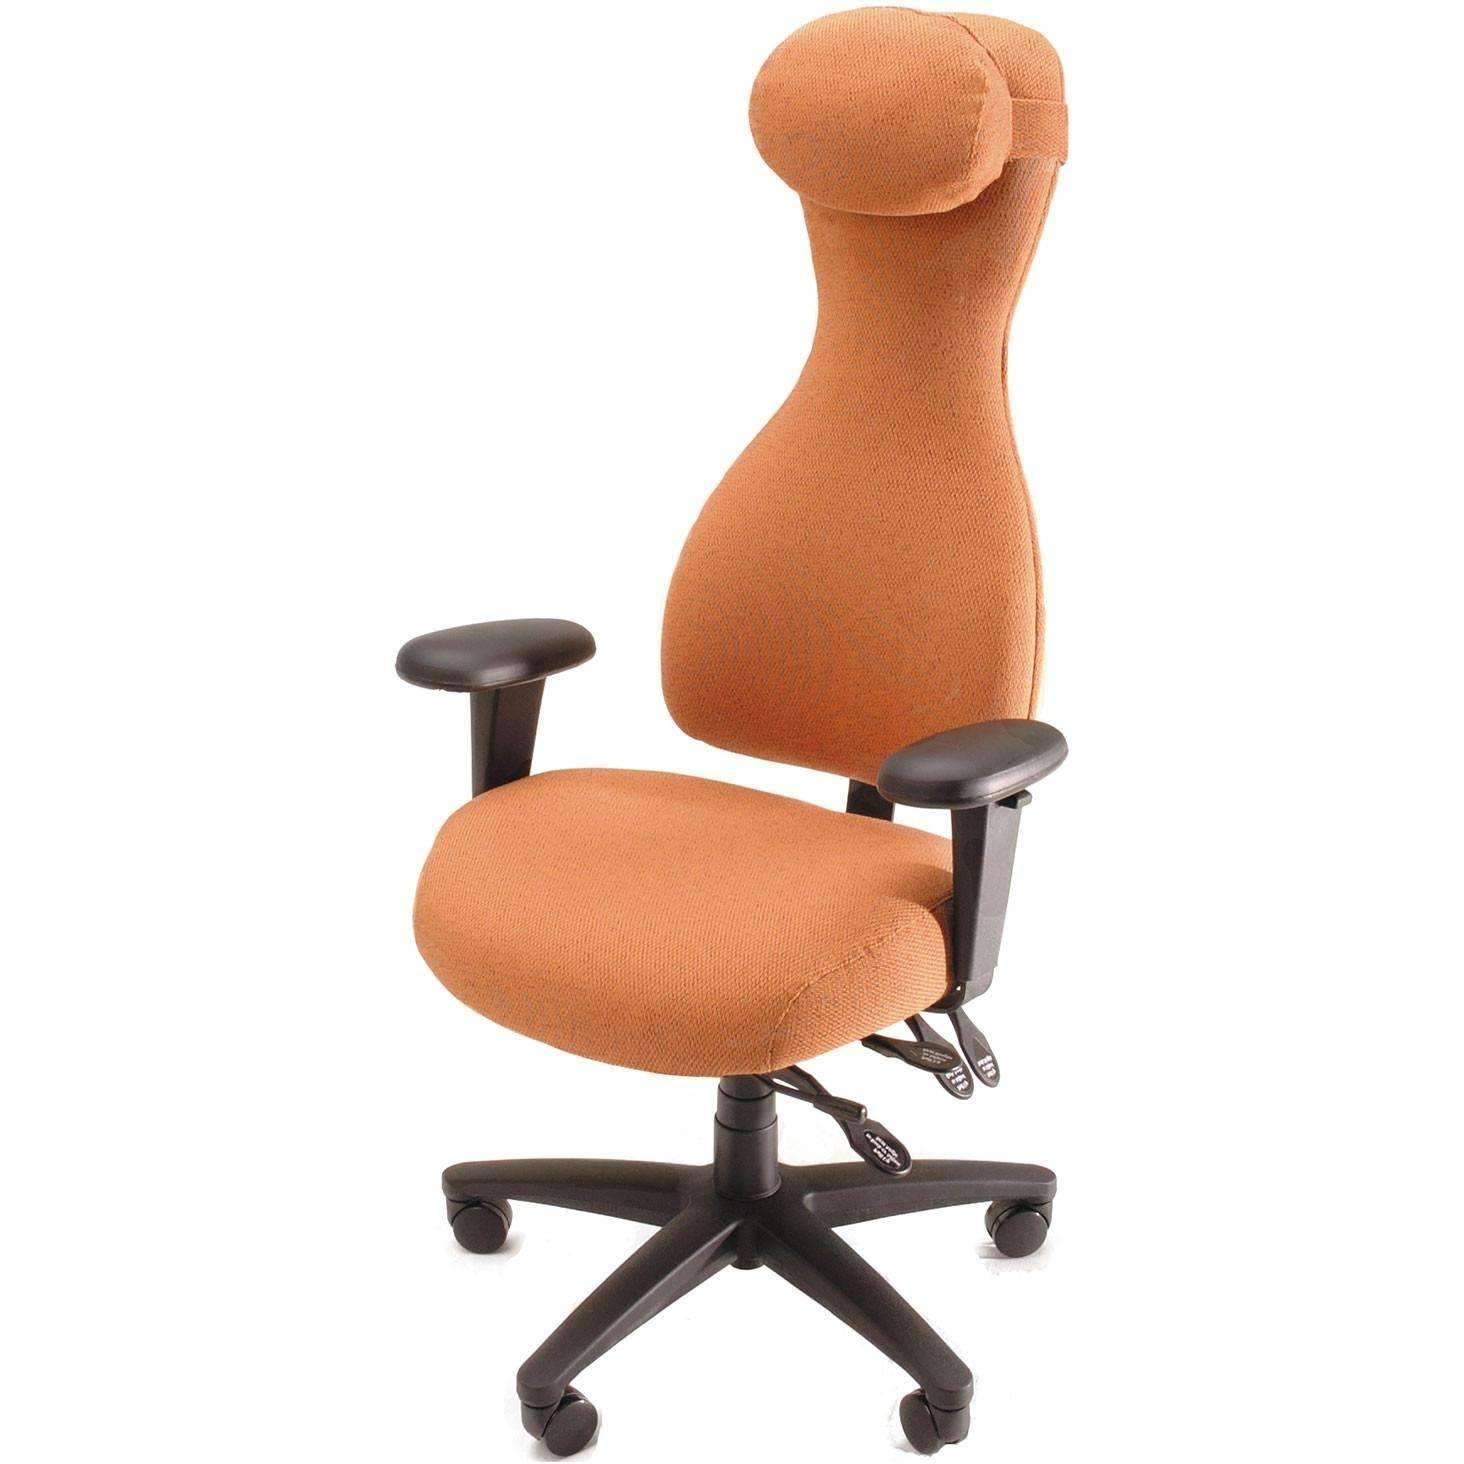 SomaComfort High Back Ergonomic Comfort and Productivity Chair by Soma | SitHealthier